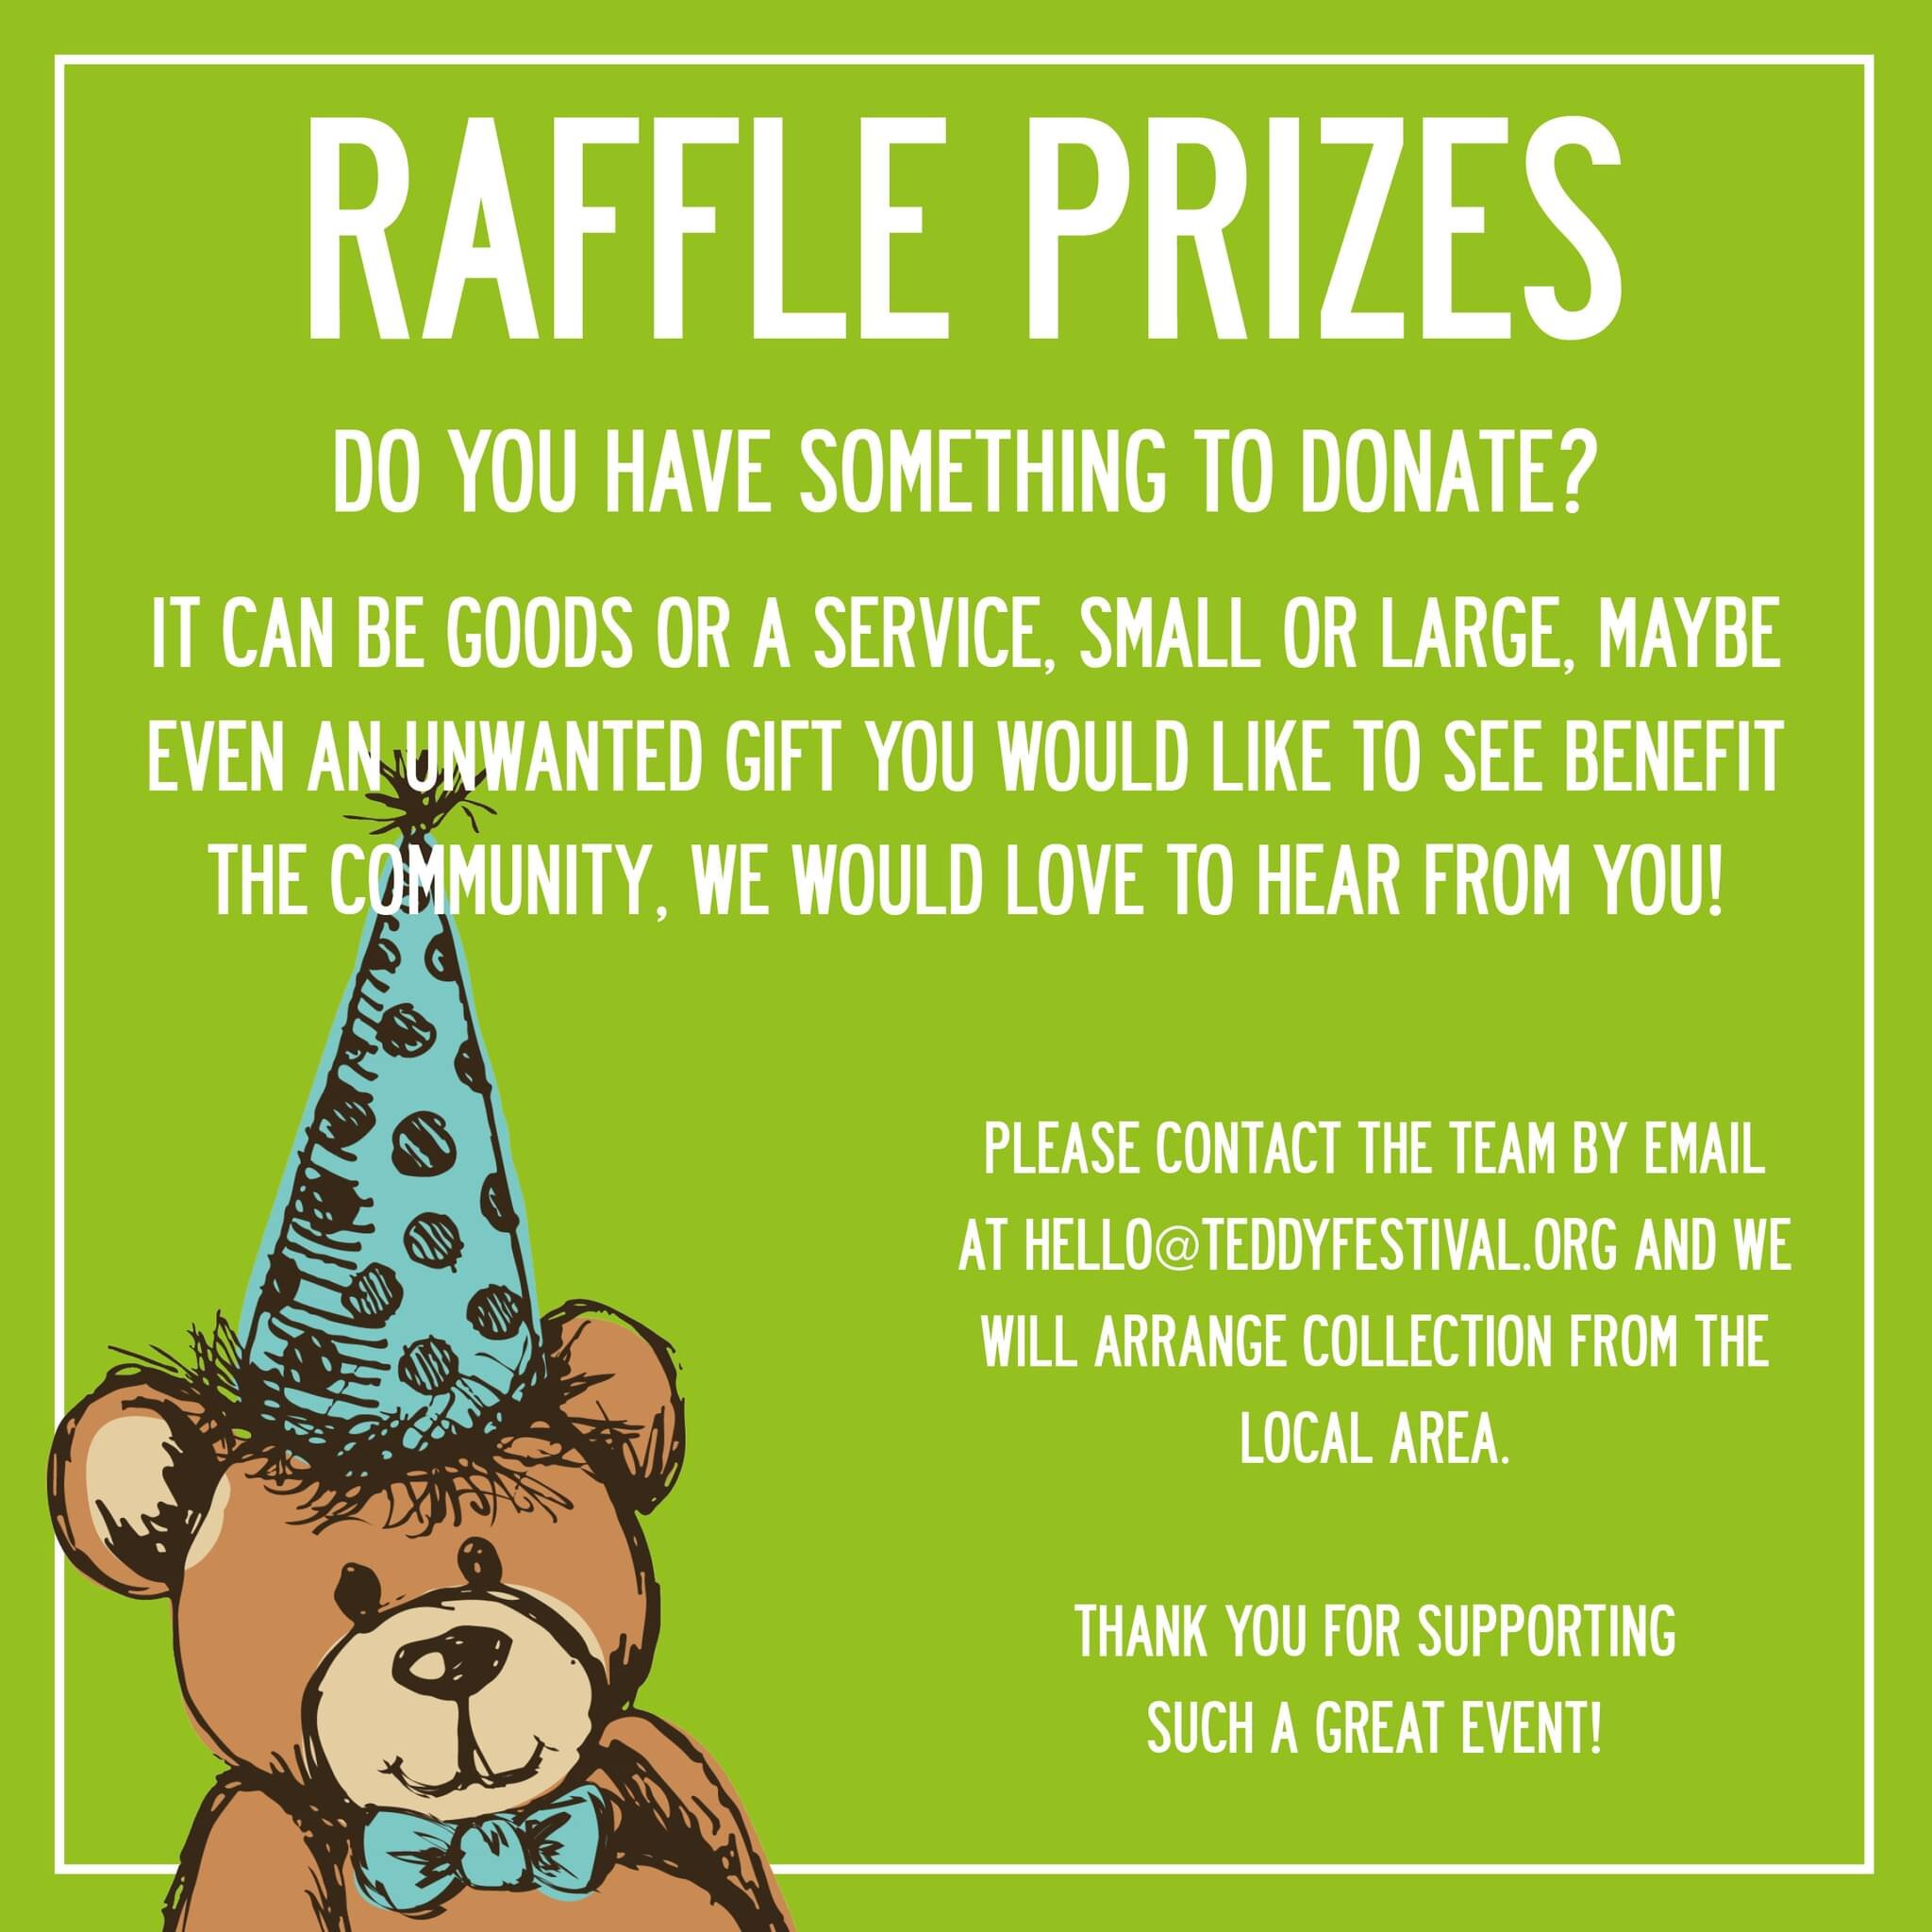 We're putting together some amazing raffle prizes!